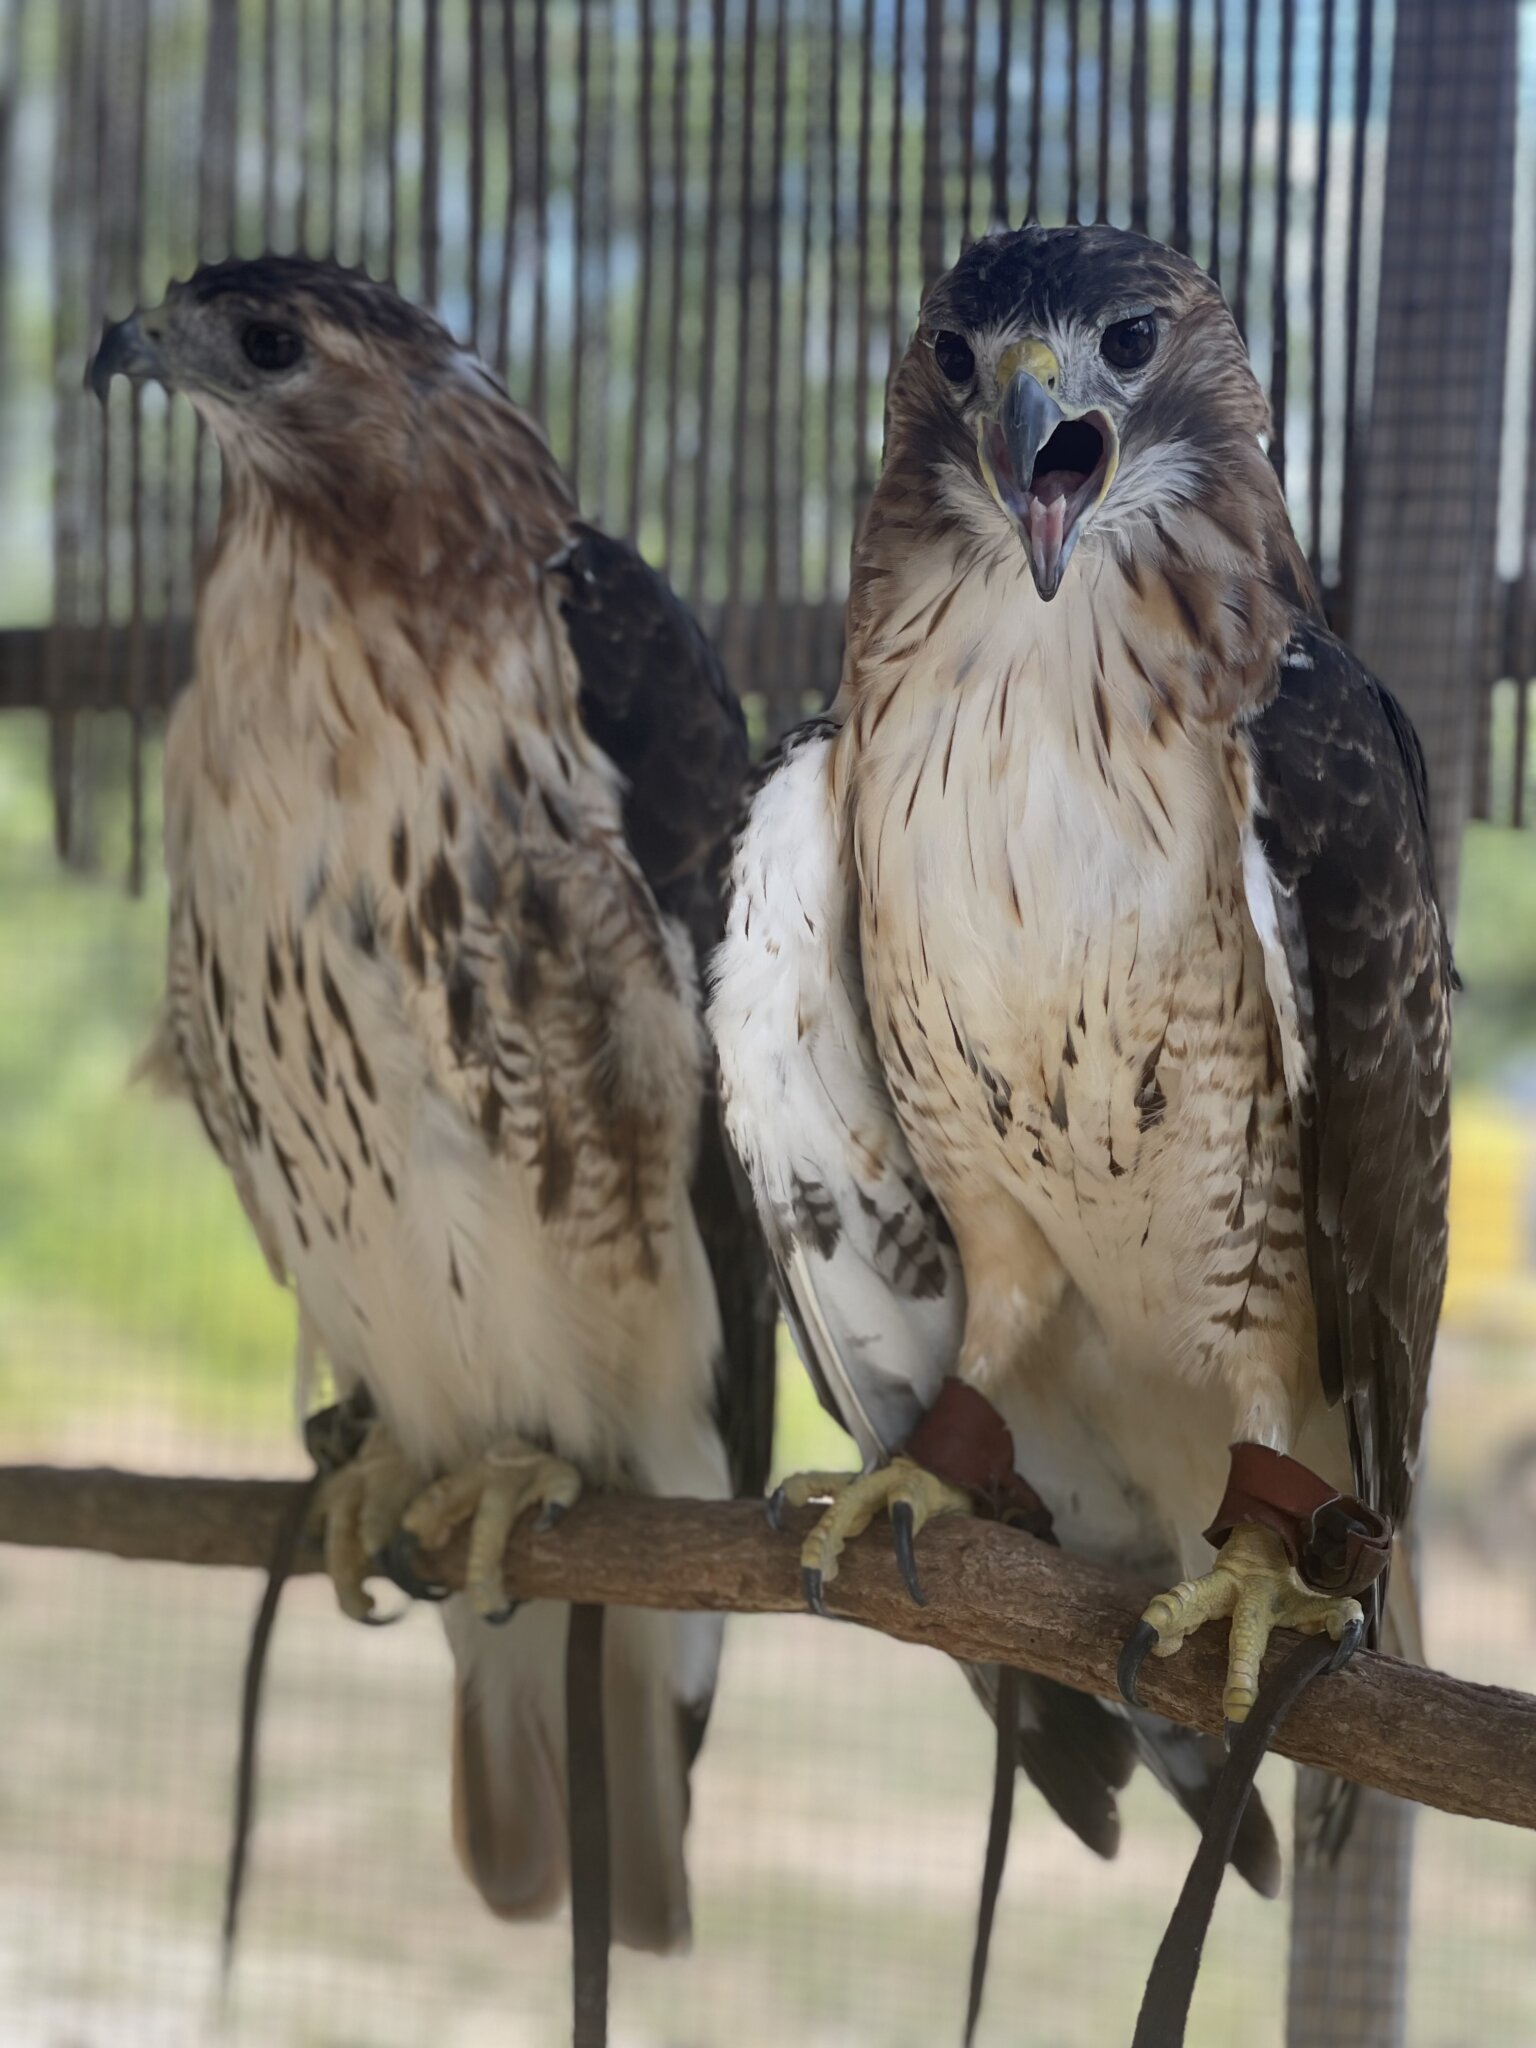 Cloud with his now-late girlfriend Sonia, both red-tailed hawks